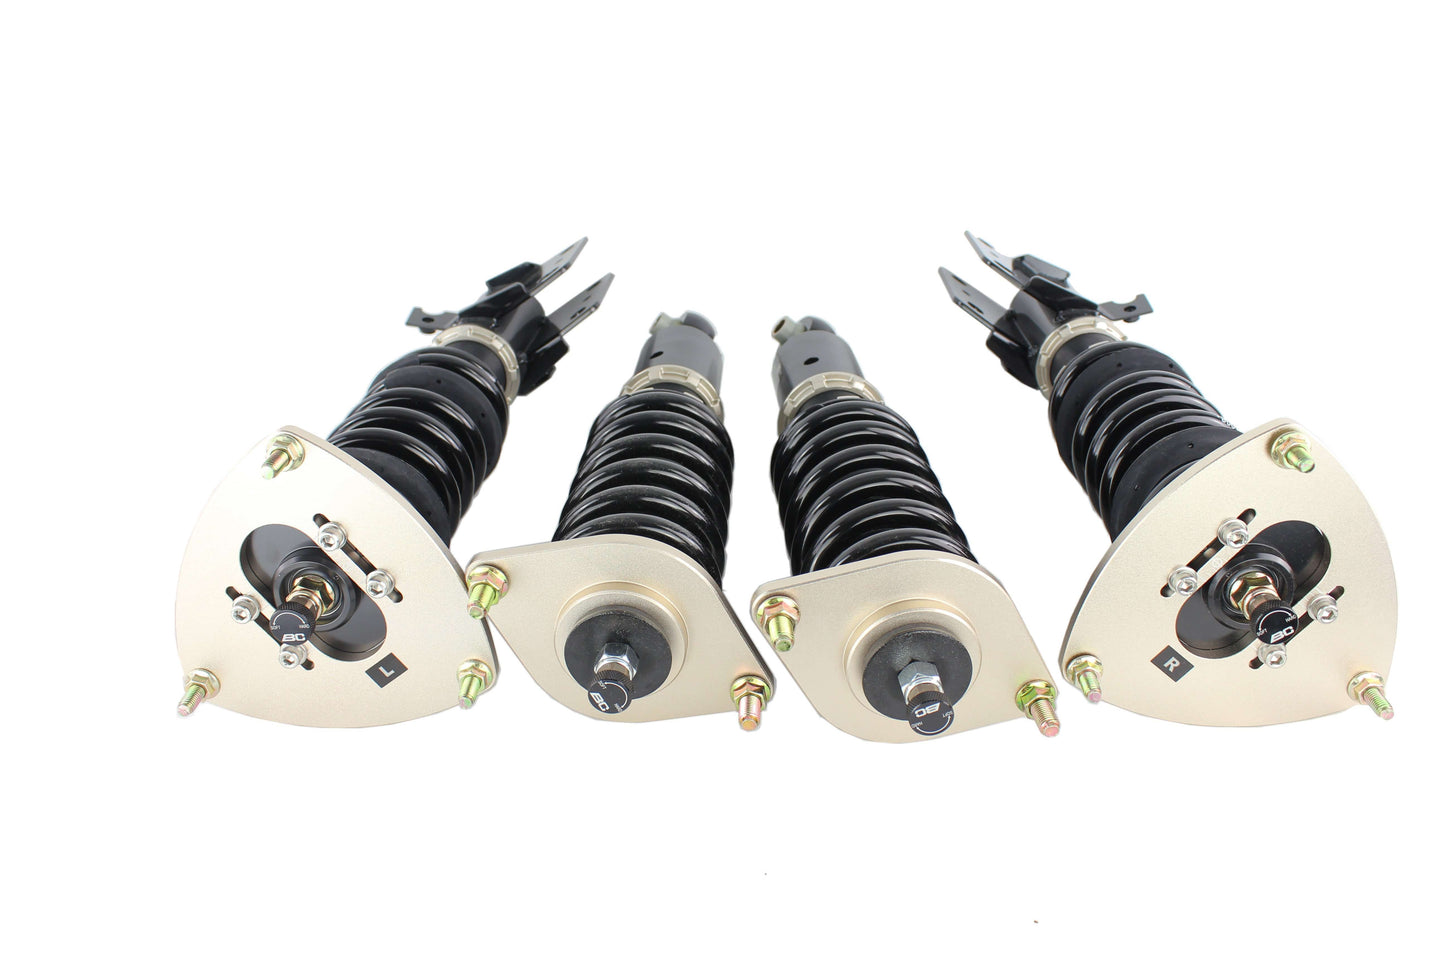 BC Racing Inverted RM Series Coilover Kit Toyota MR2 1990-1999